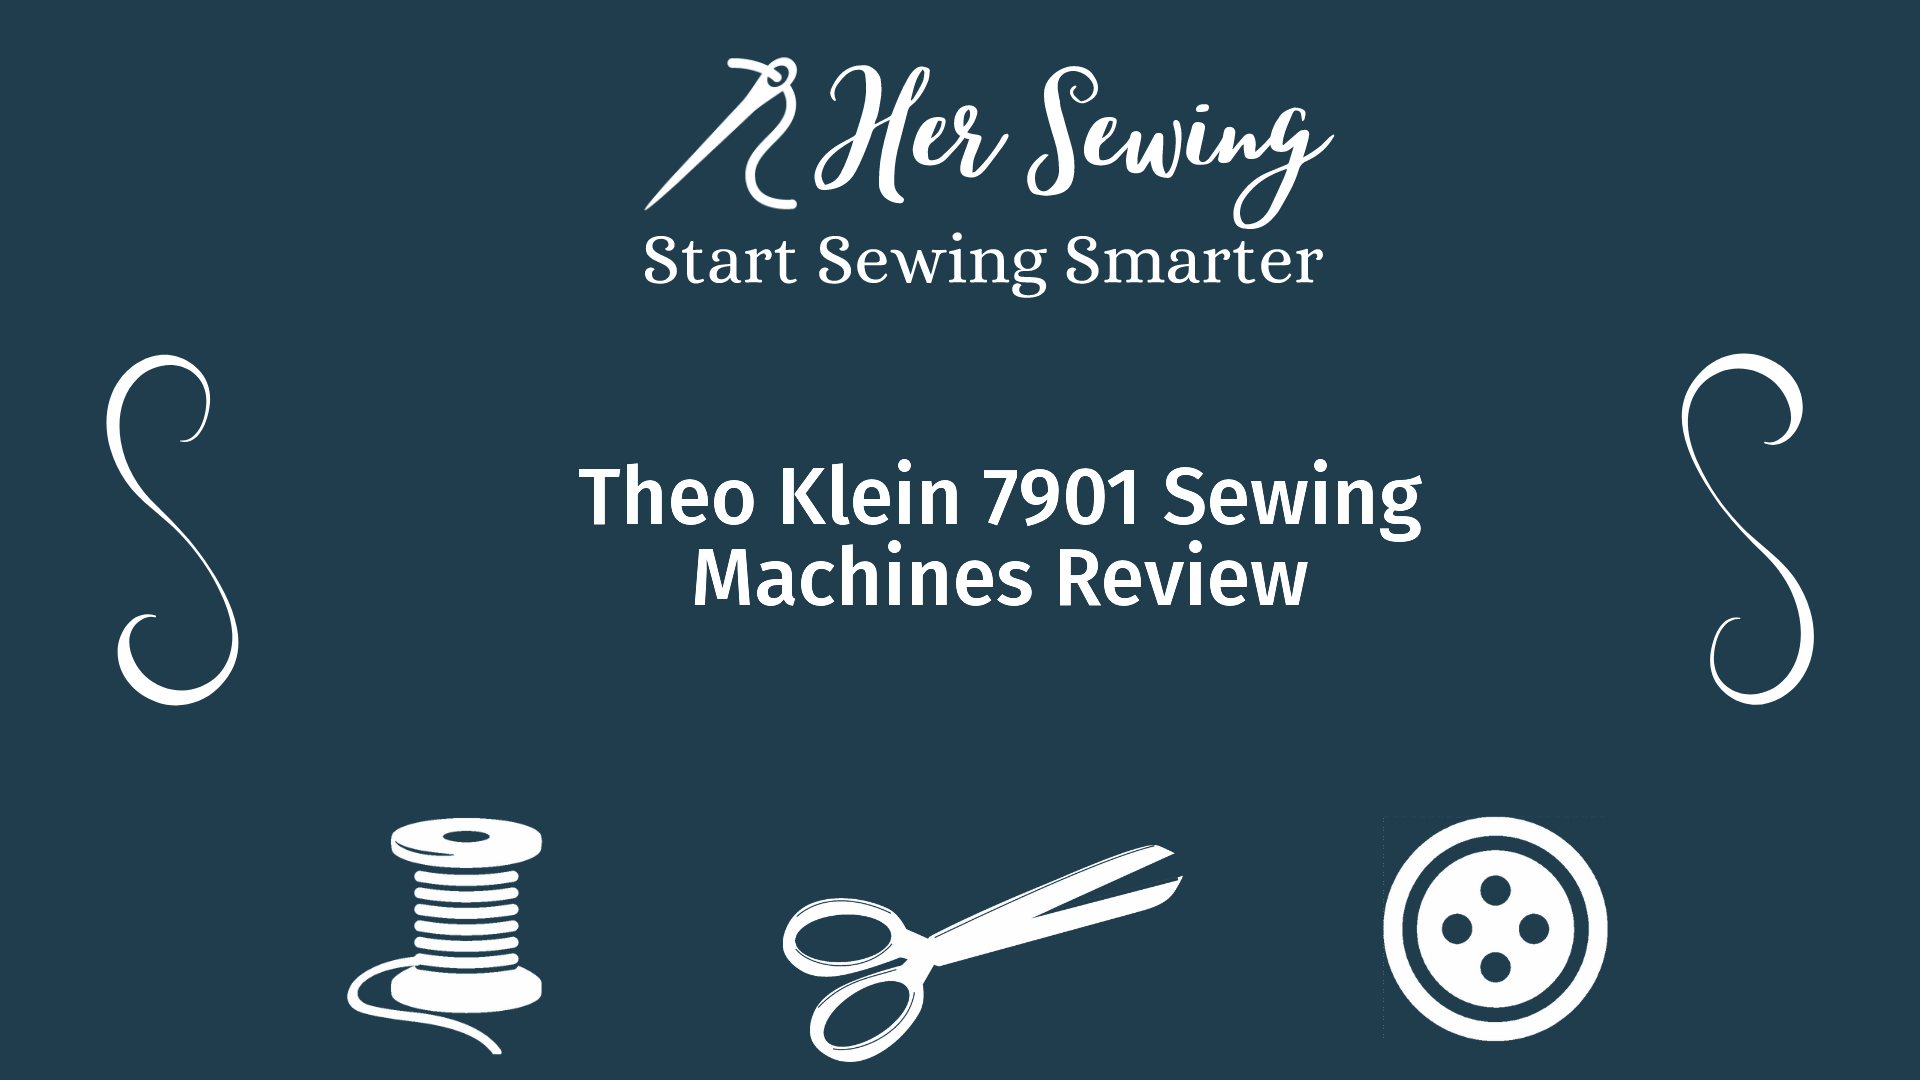 Theo Klein 7901 Sewing Machines Review